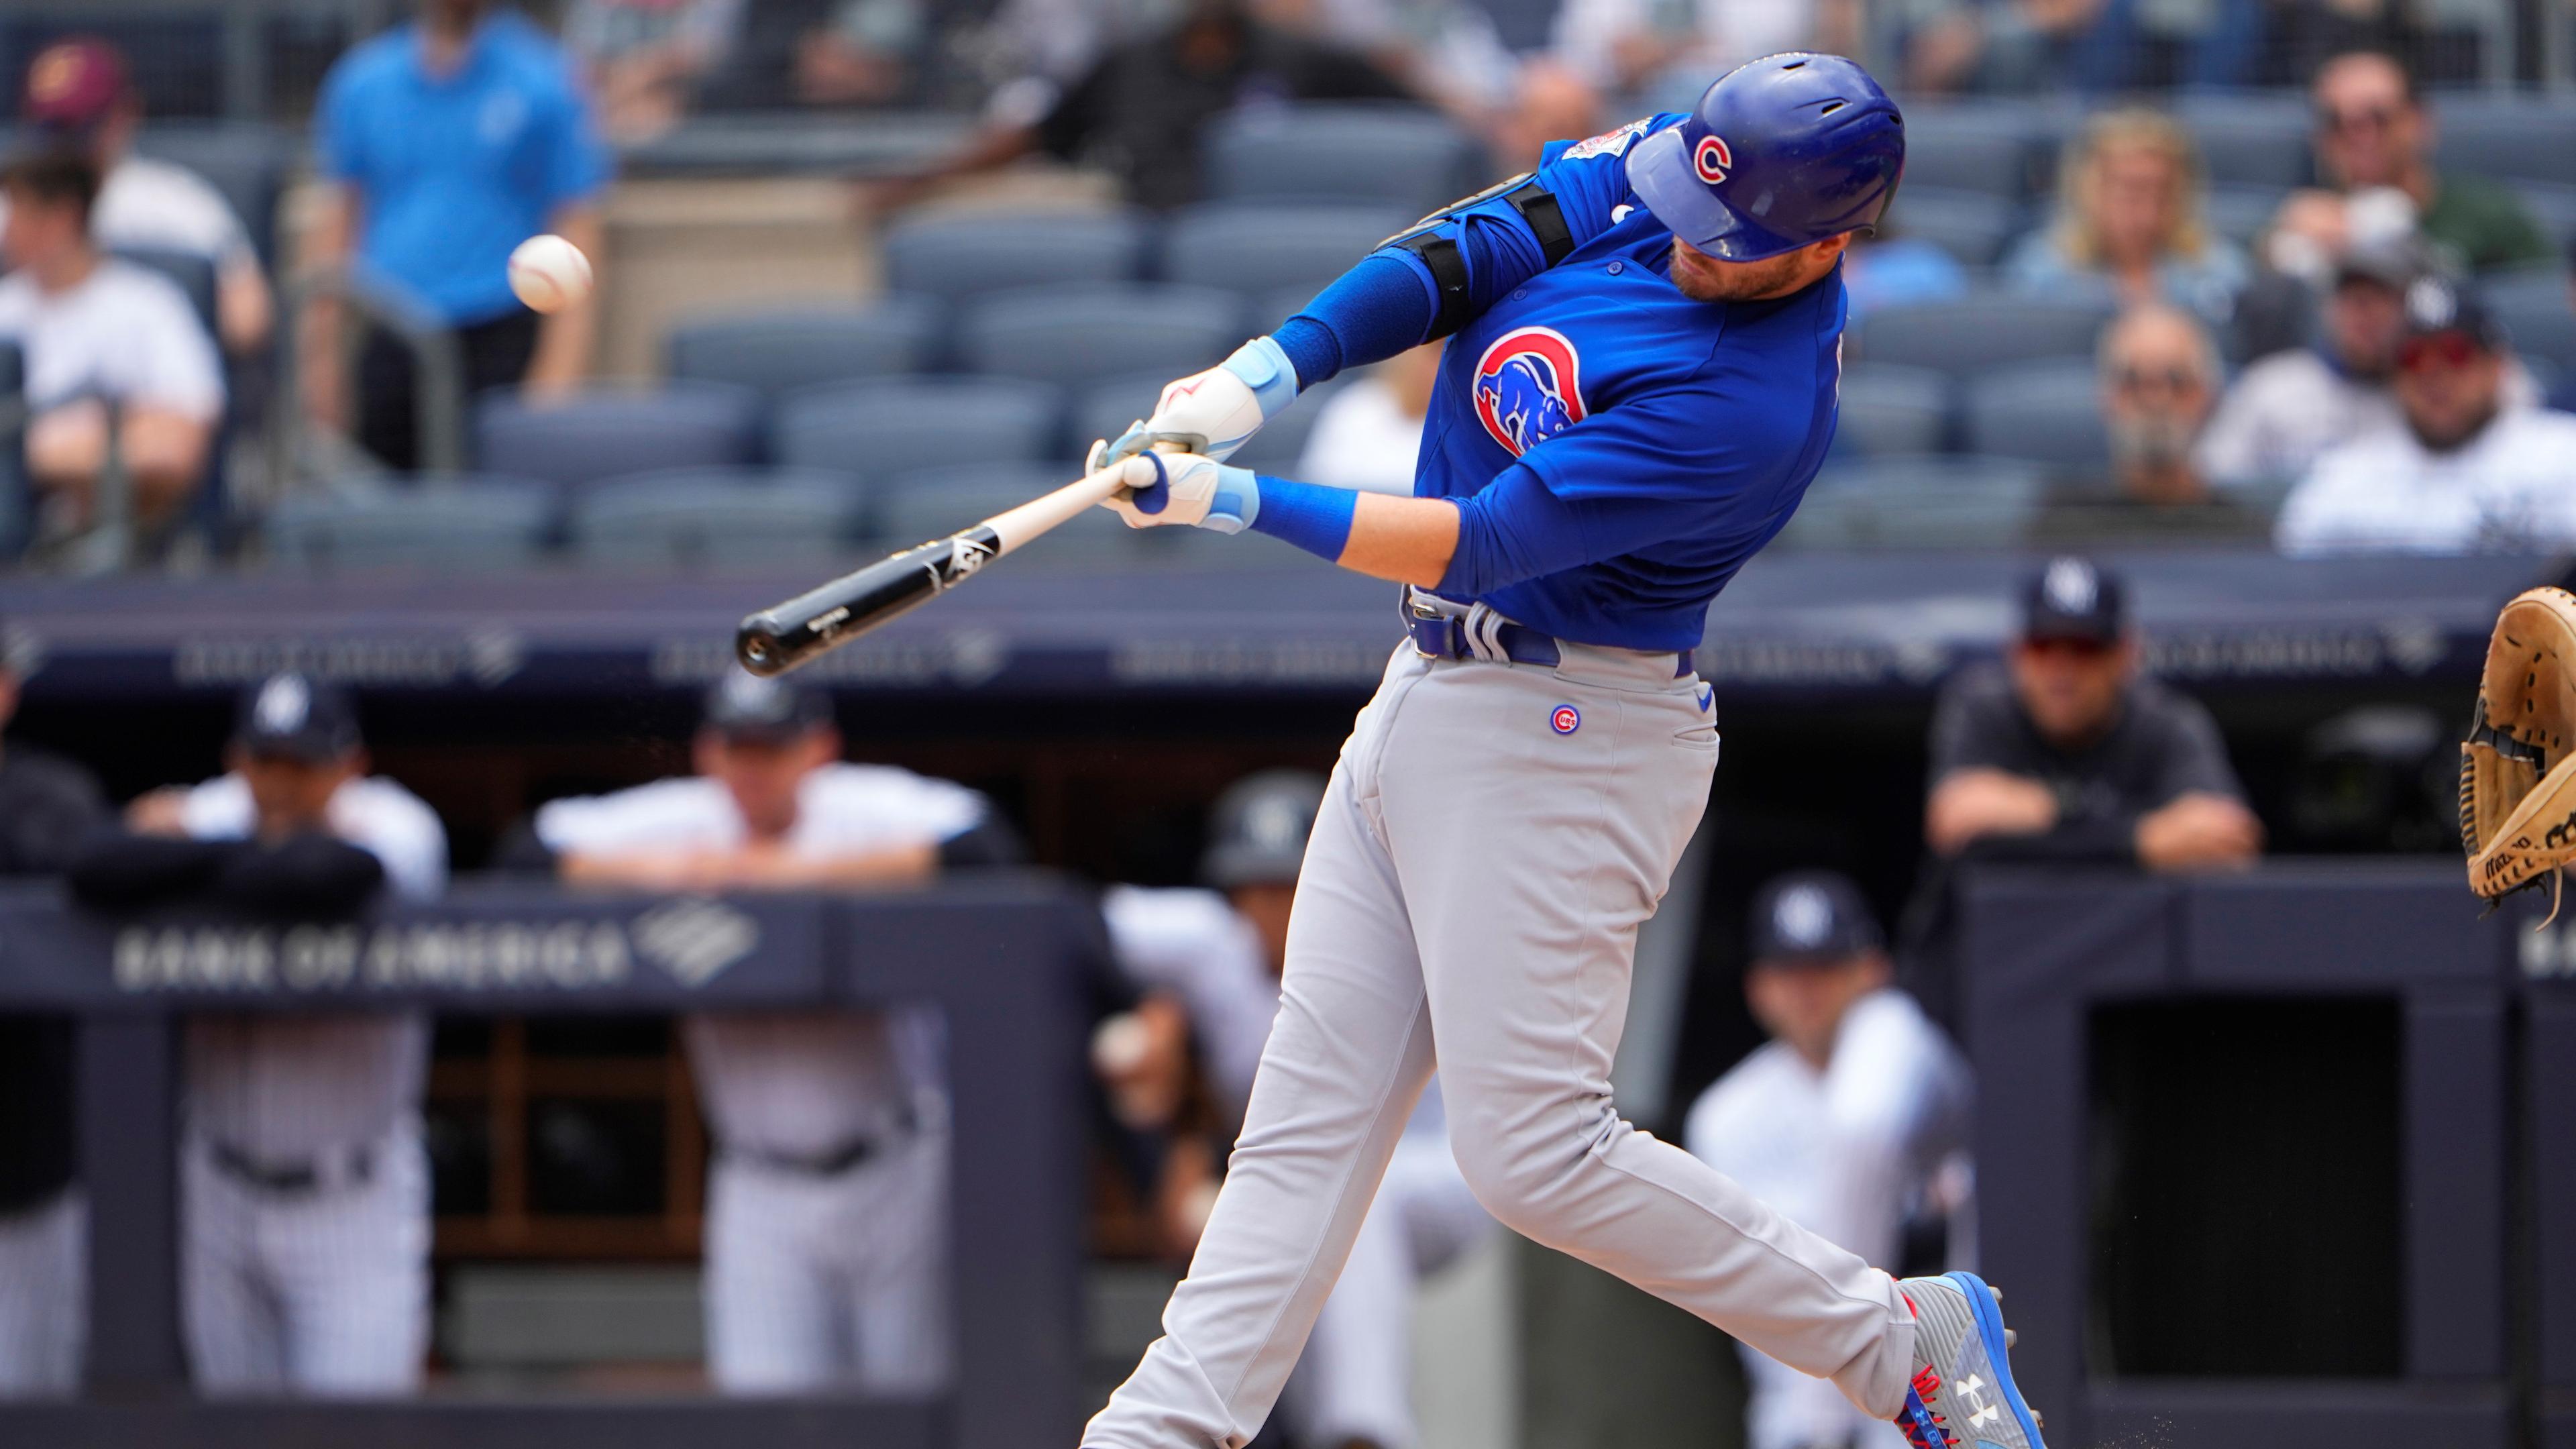 Chicago Cubs designated hitter Ian Happ (8) hits a home run against the New York Yankees during the first inning at Yankee Stadium. / Gregory Fisher-USA TODAY Sports